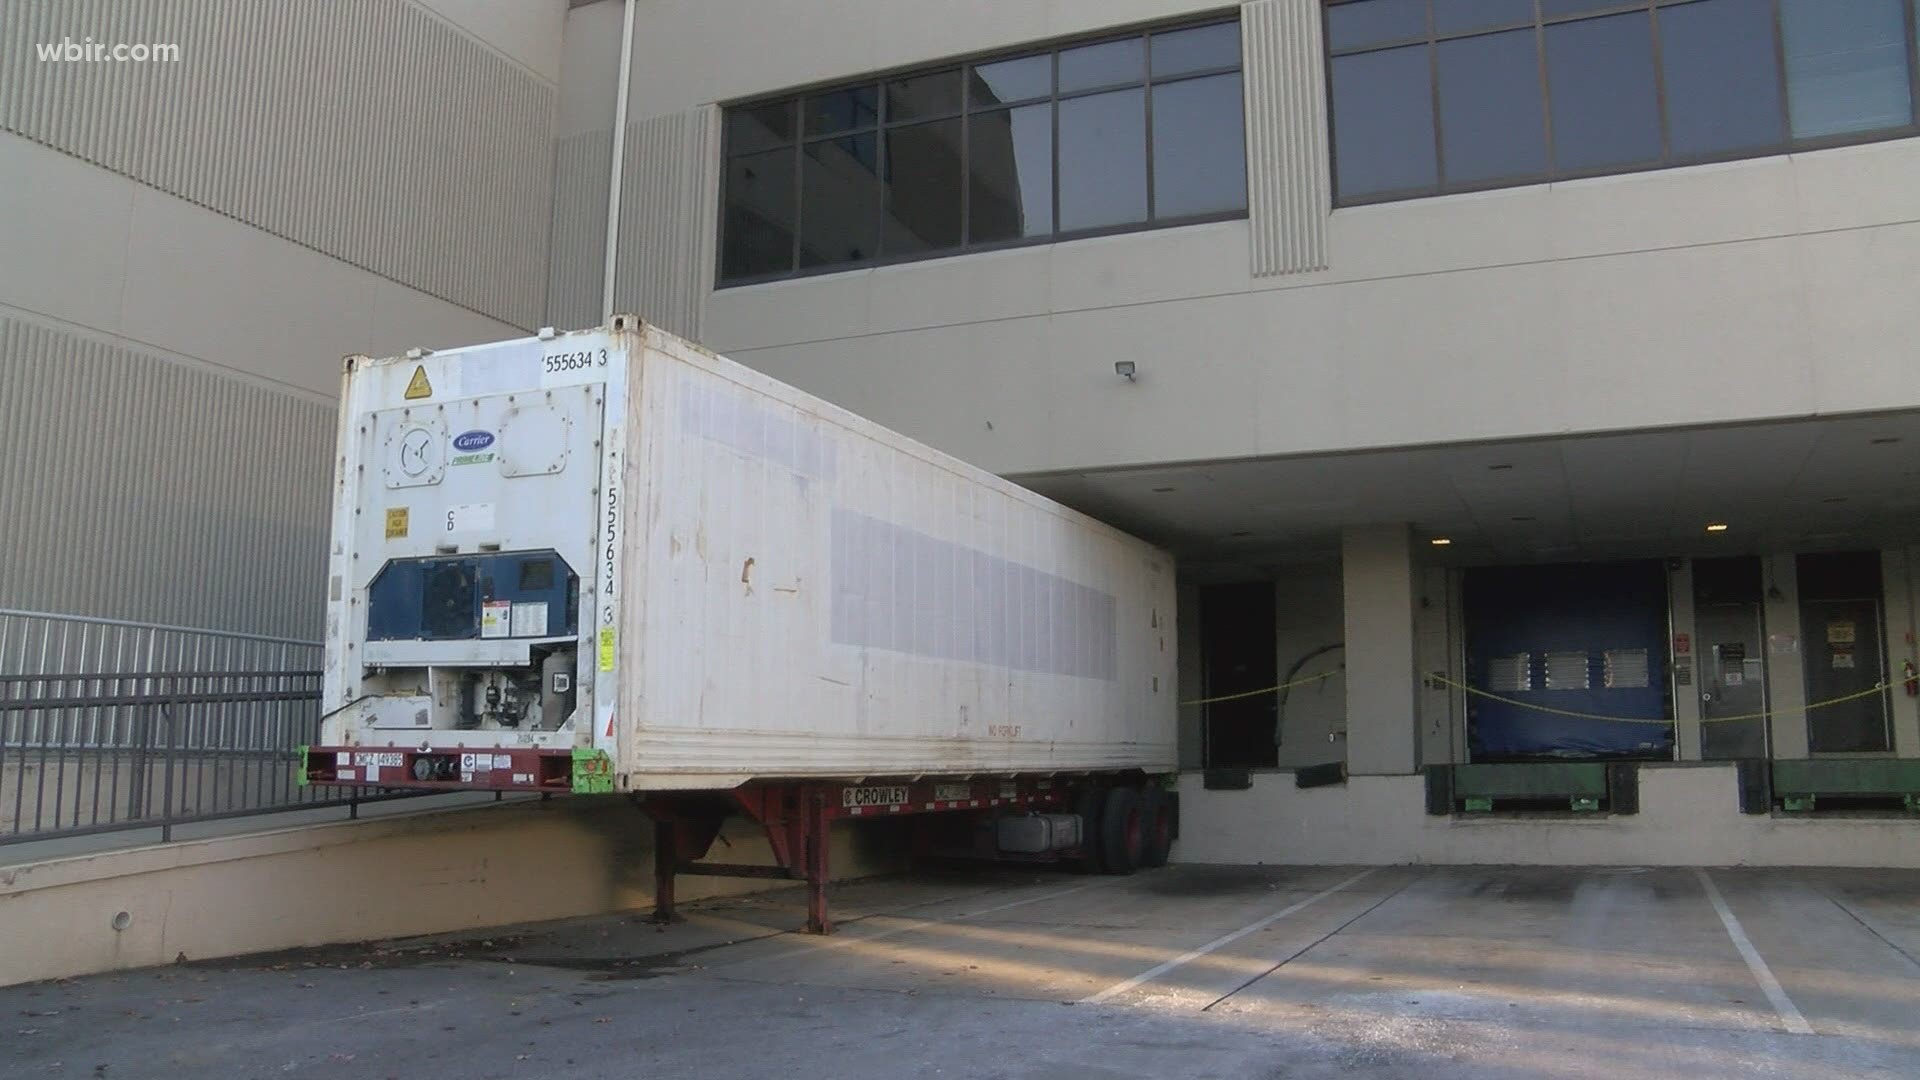 Ballad Health says Johnson City Medical Center plans to start using the mobile morgue truck to hold bodies after its morgue filled up this week.